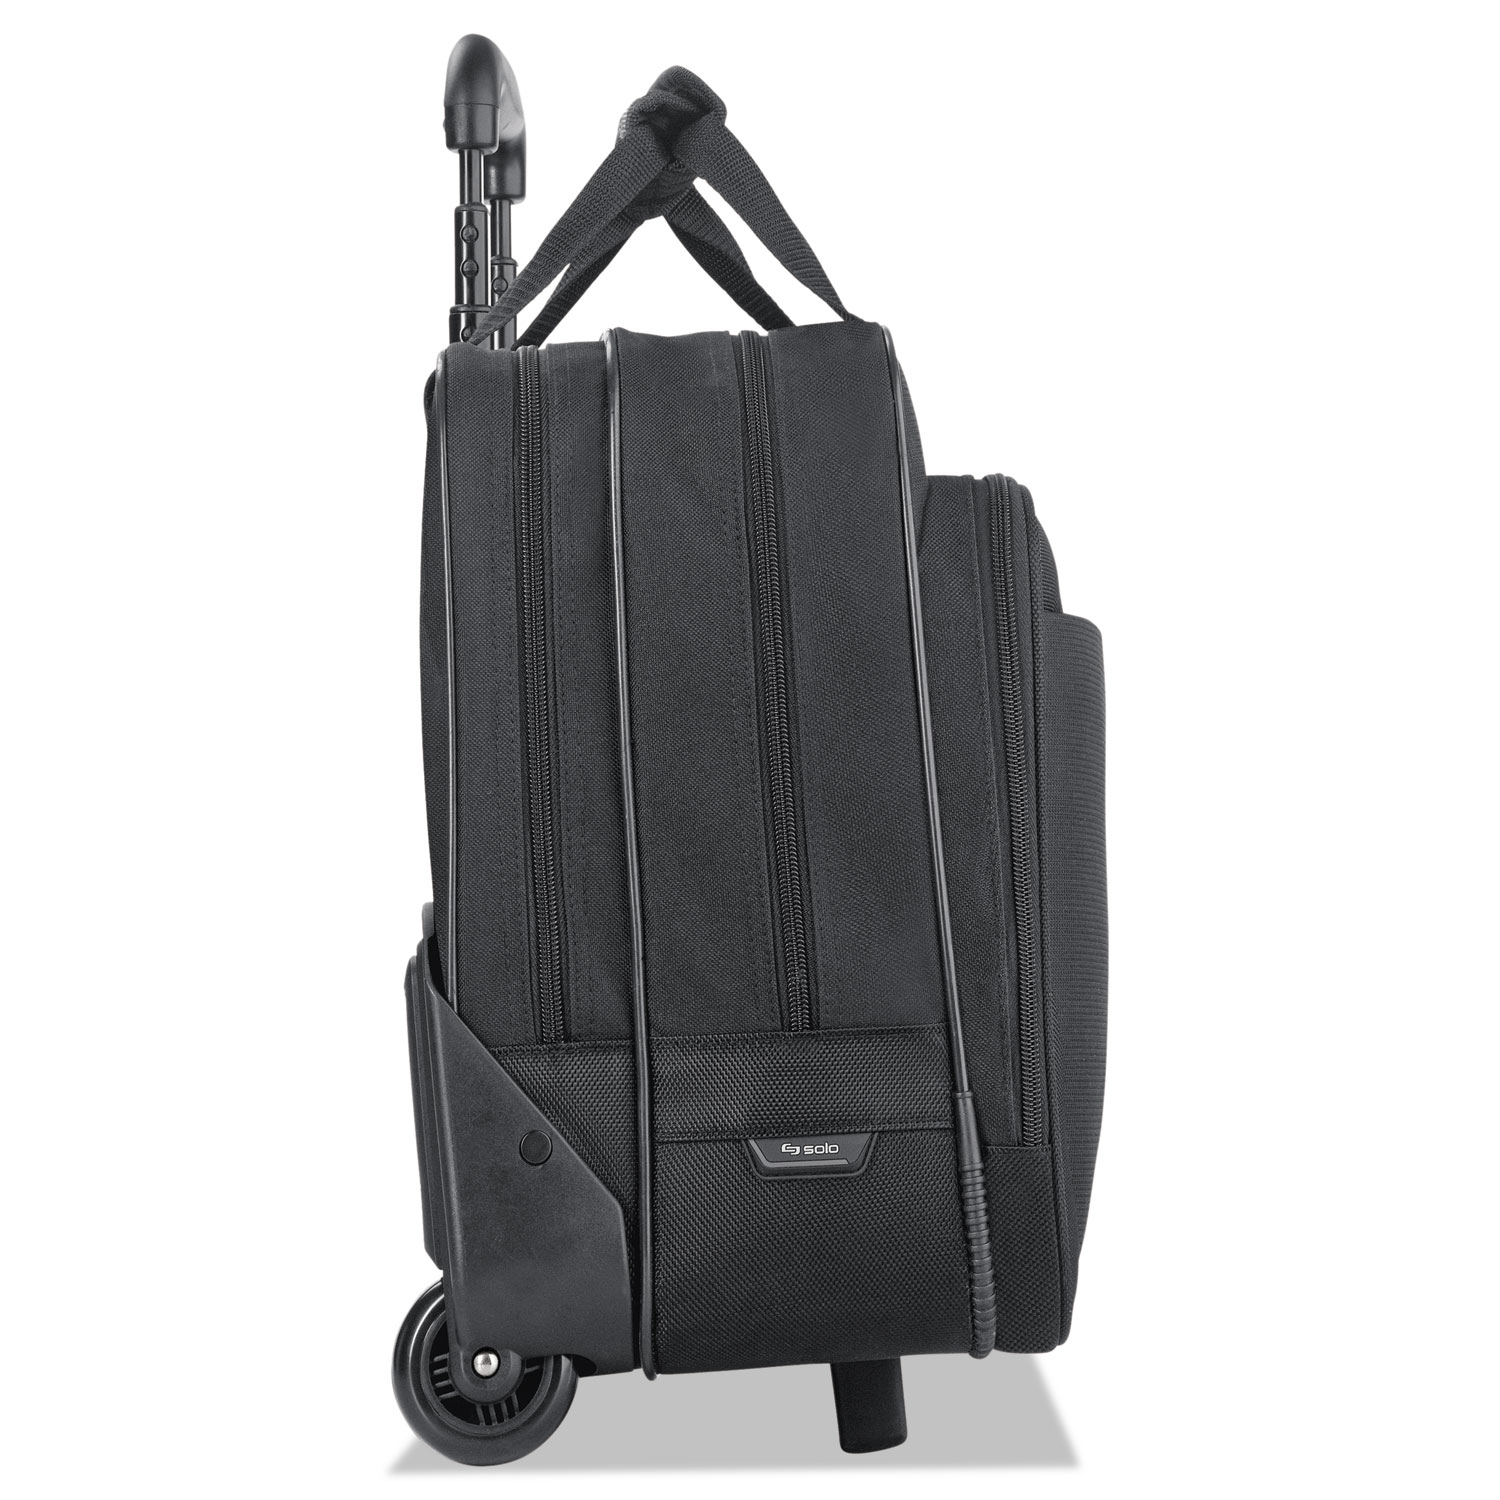 SOLO Classic Rolling Case, 17.3", 16 3/4" x 7" x 14 19/50", Black (CLS9104) - image 2 of 9